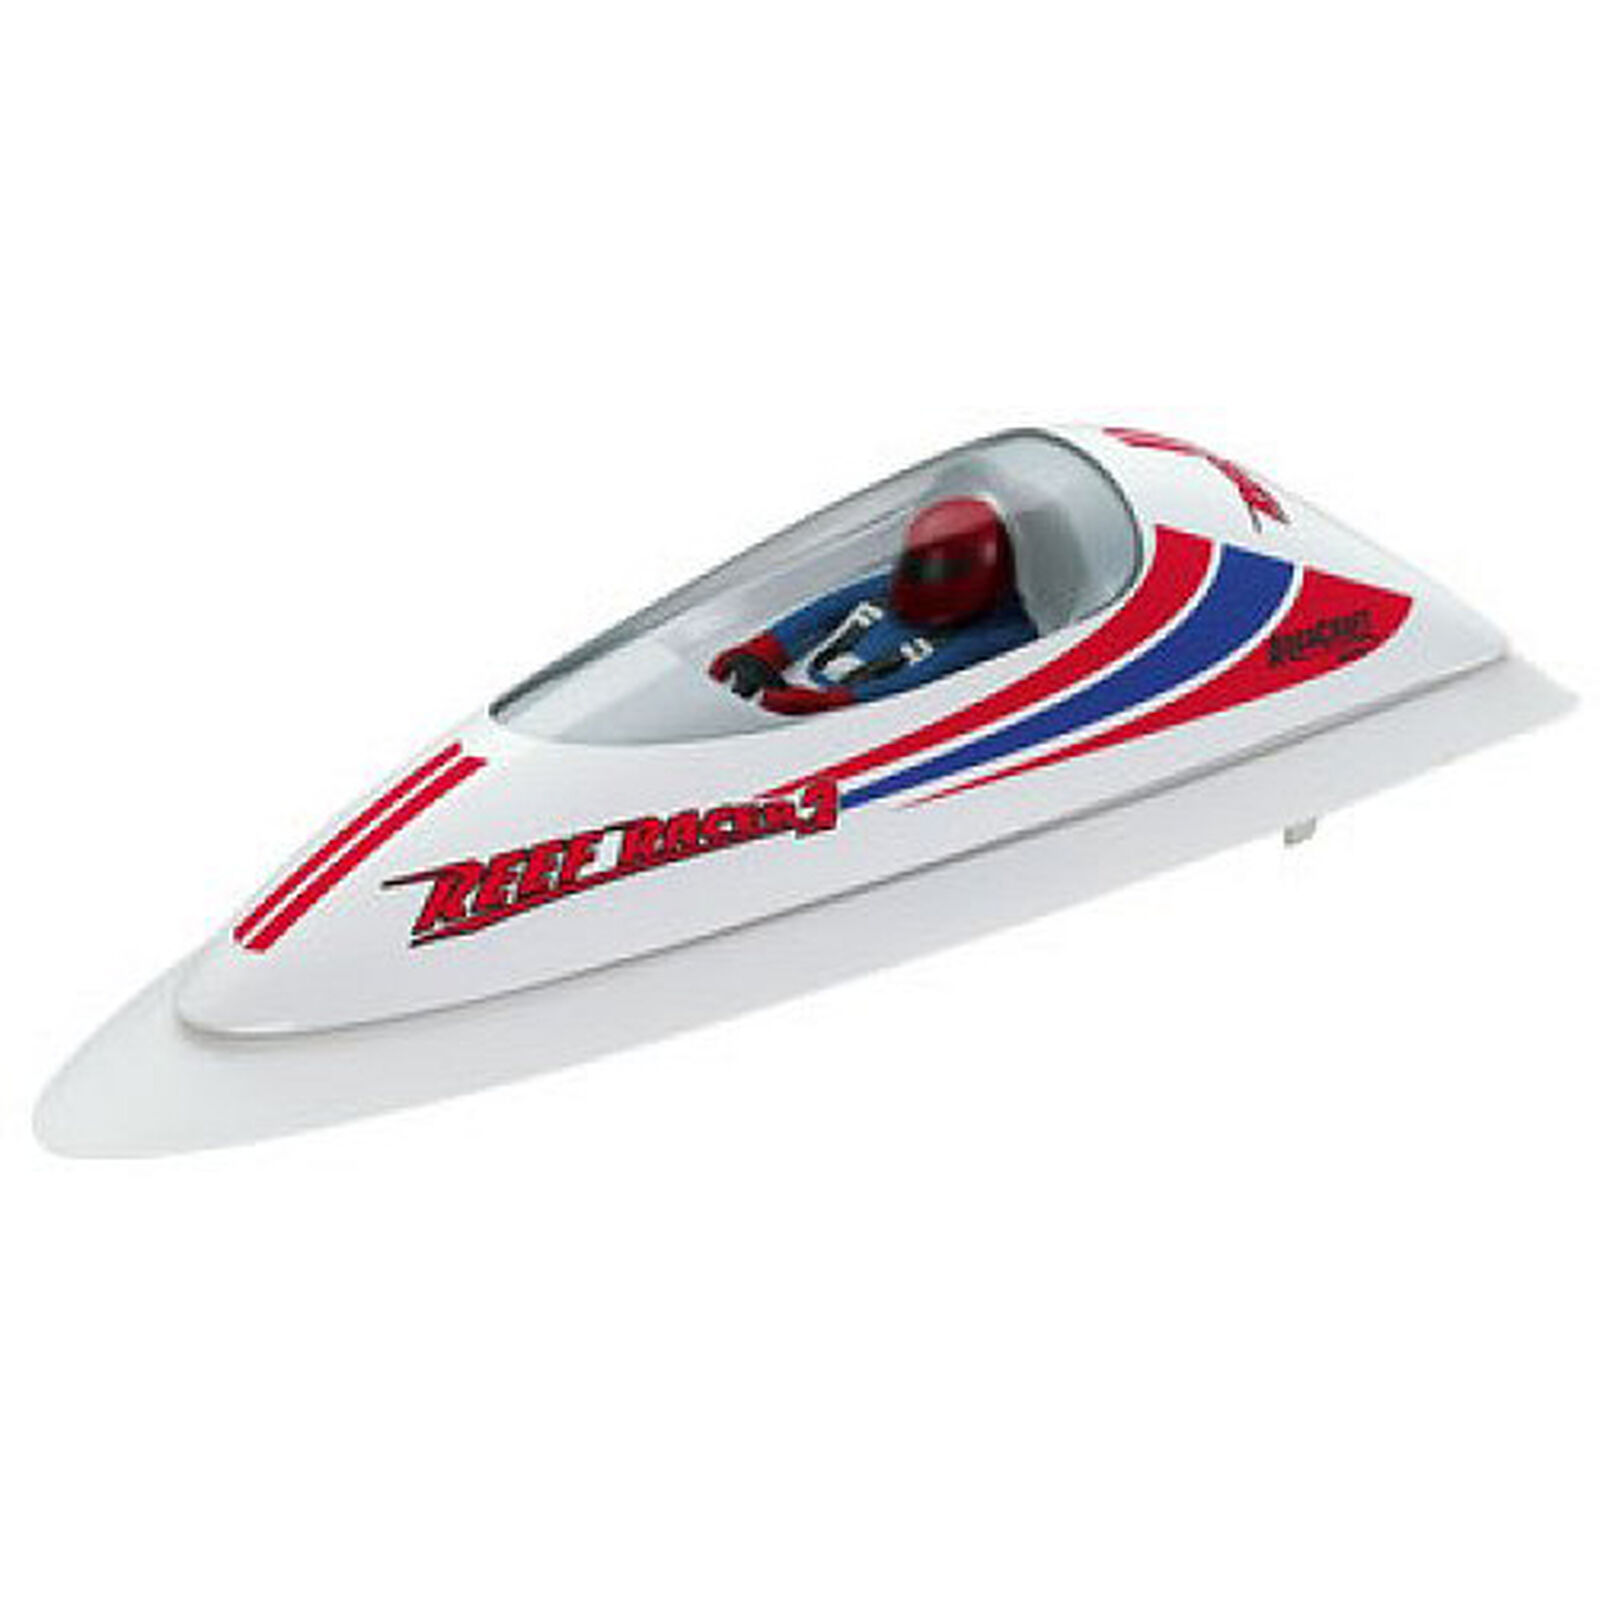 Reef Racer 2 RTR Boat White A1